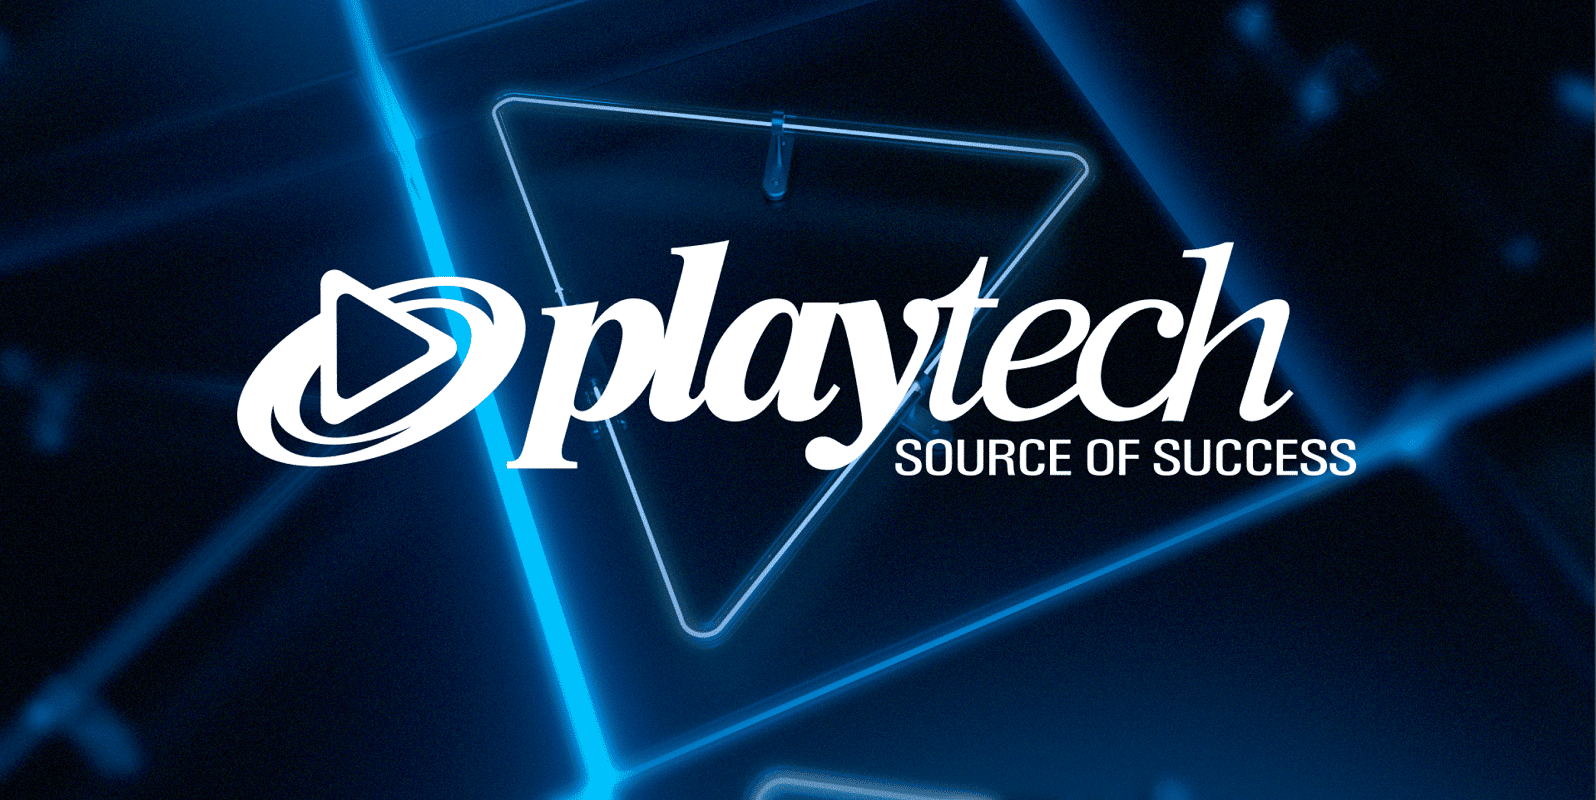 Playtech sells YoYo Games to Opera for $10m